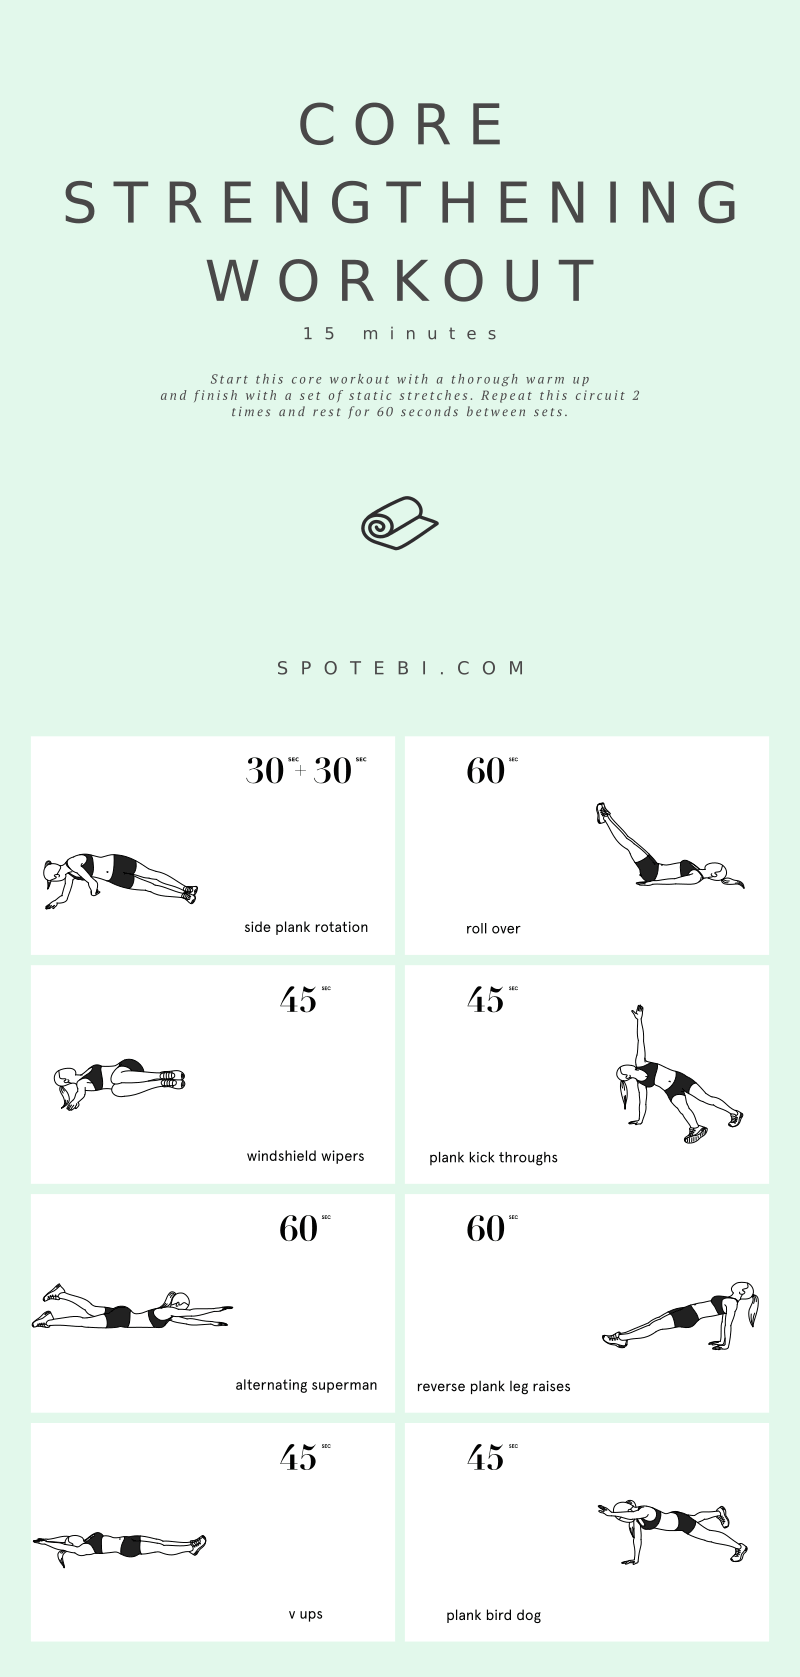 Want to lose weight and tighten your core muscles without going to the gym? Then do this 15-Minute Core Strengthening Workout weekly, and you'll be amazed by the results! https://www.spotebi.com/workout-routines/15-minute-core-strengthening-workout/